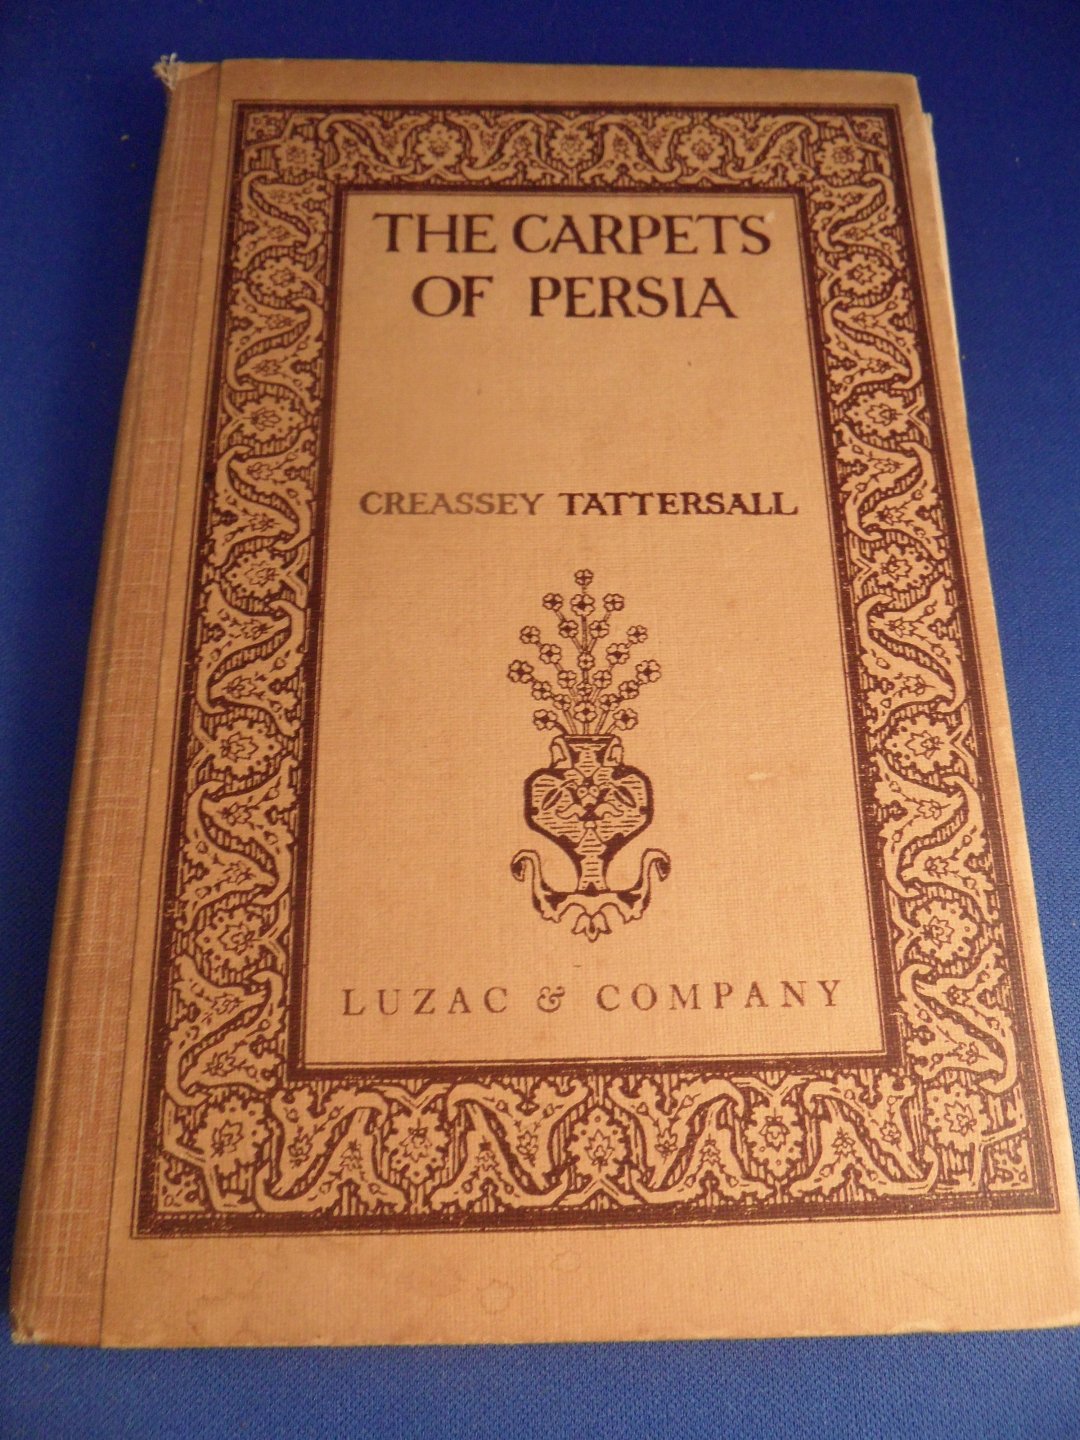 Tattersall, Creassey - The carpets of Persia